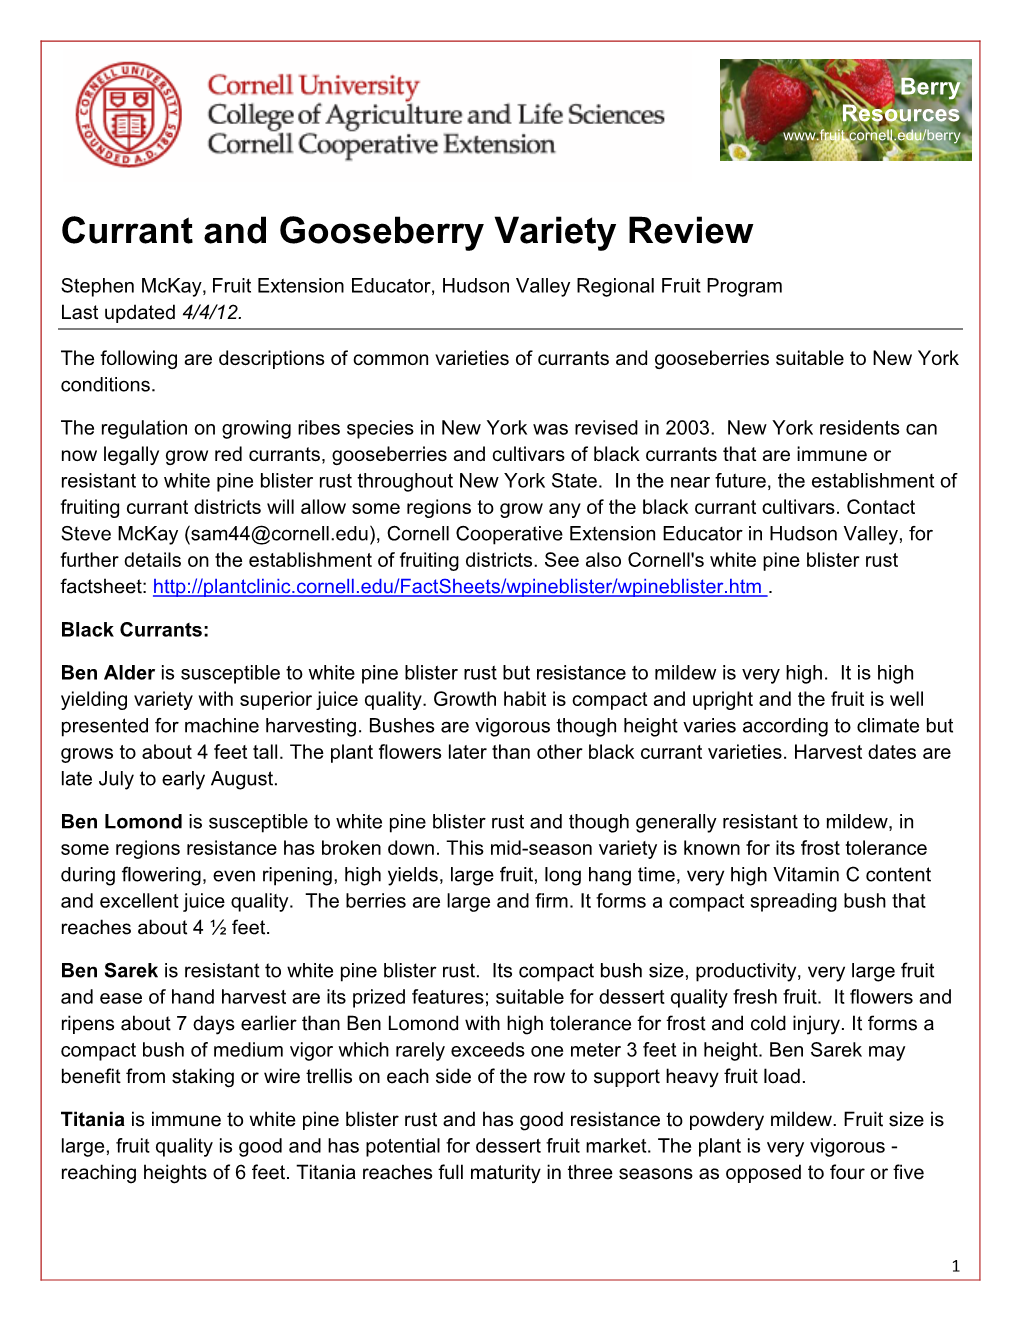 Currant and Gooseberry Variety Review